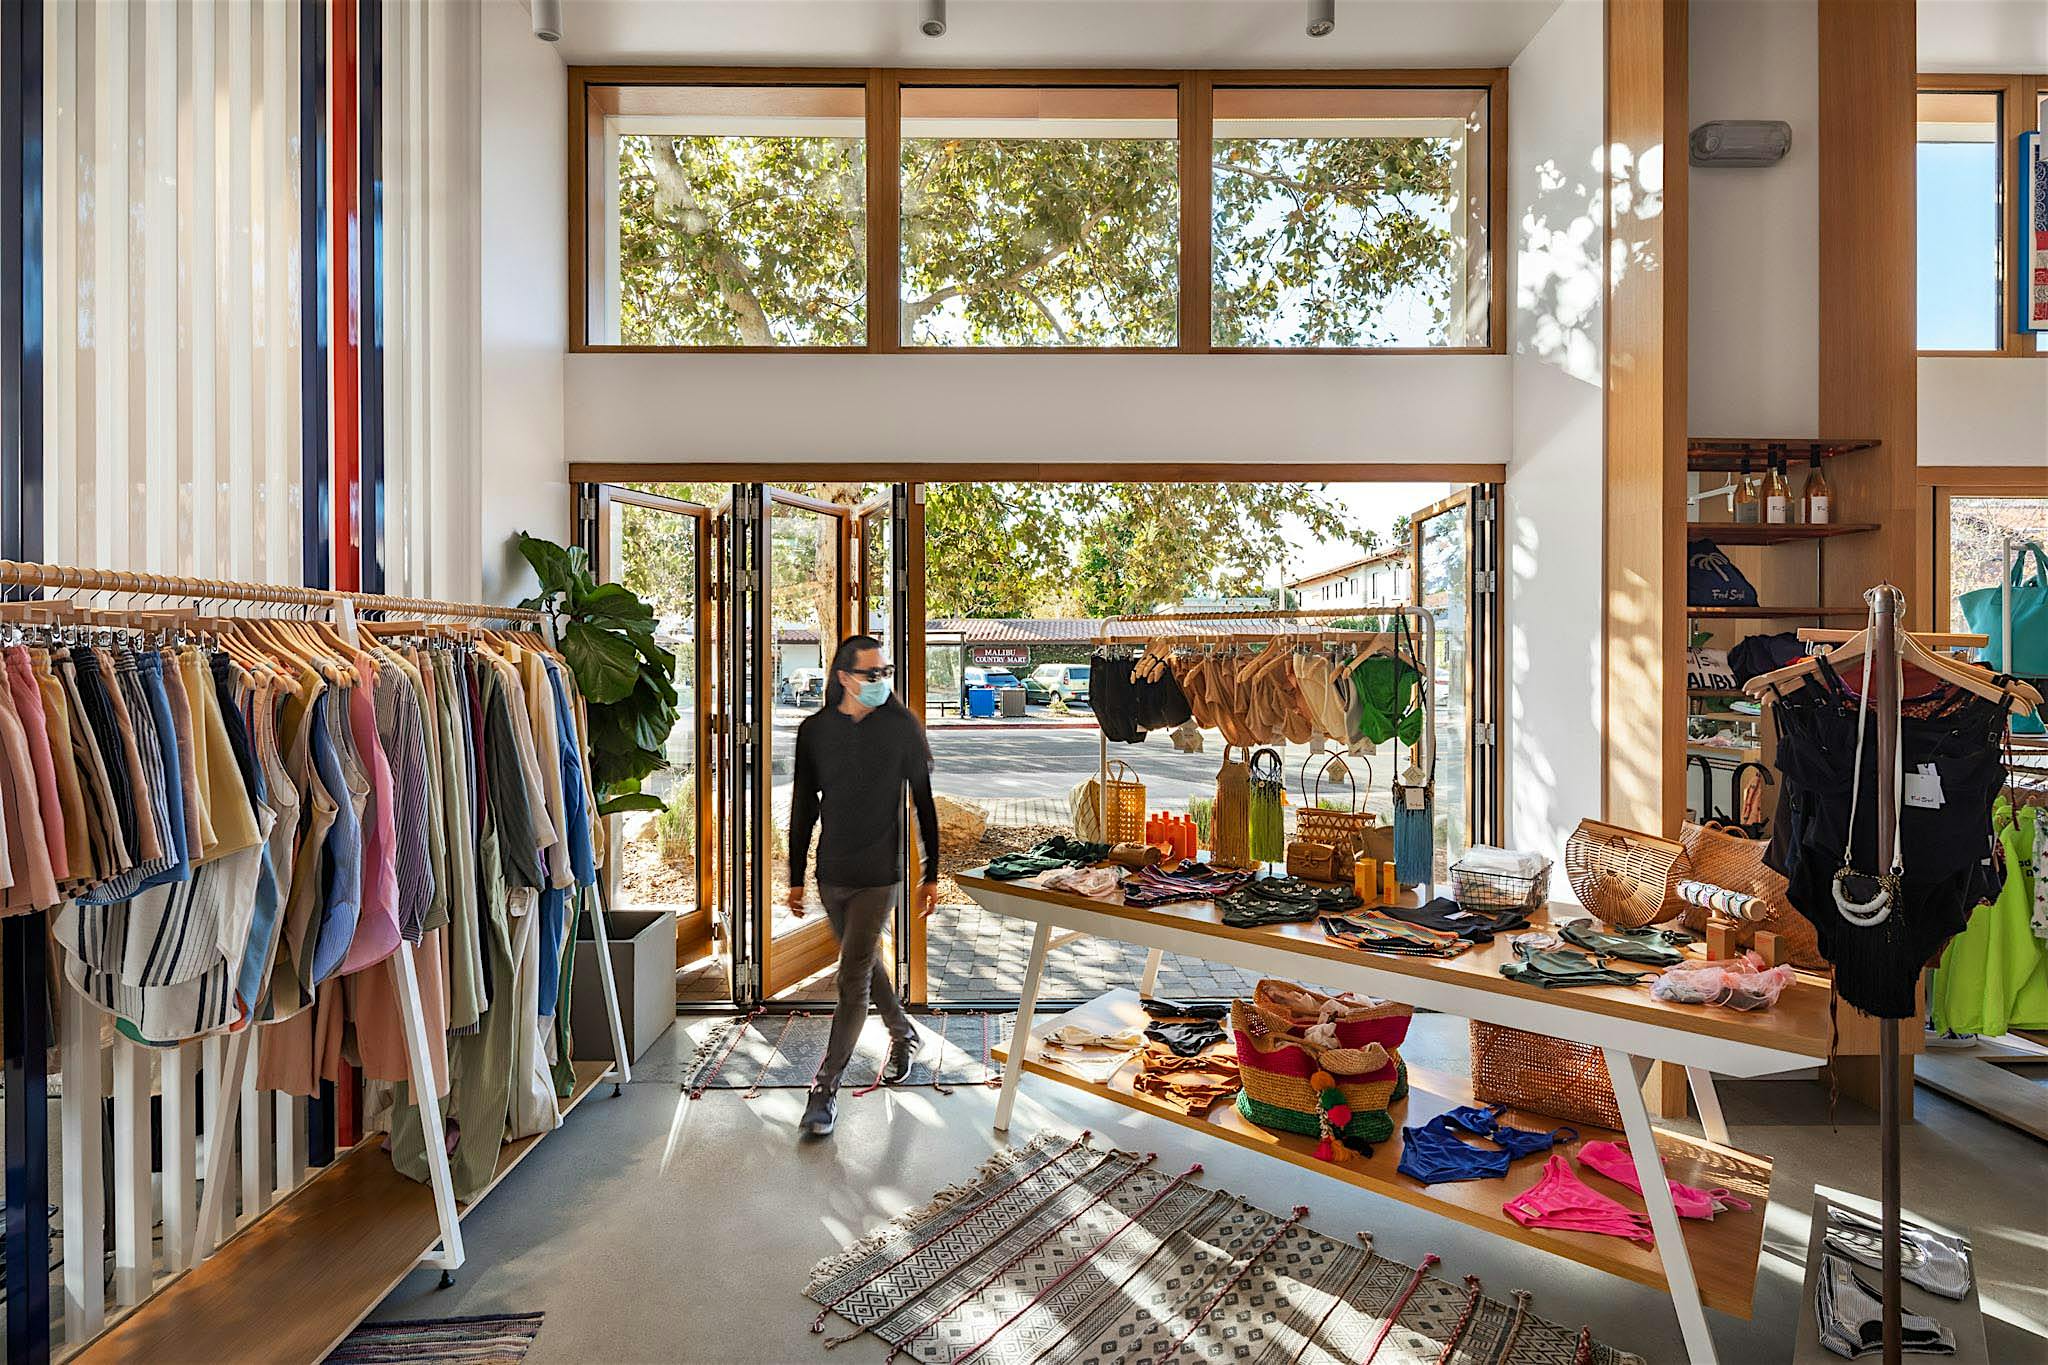 moveable glass storefront in wood